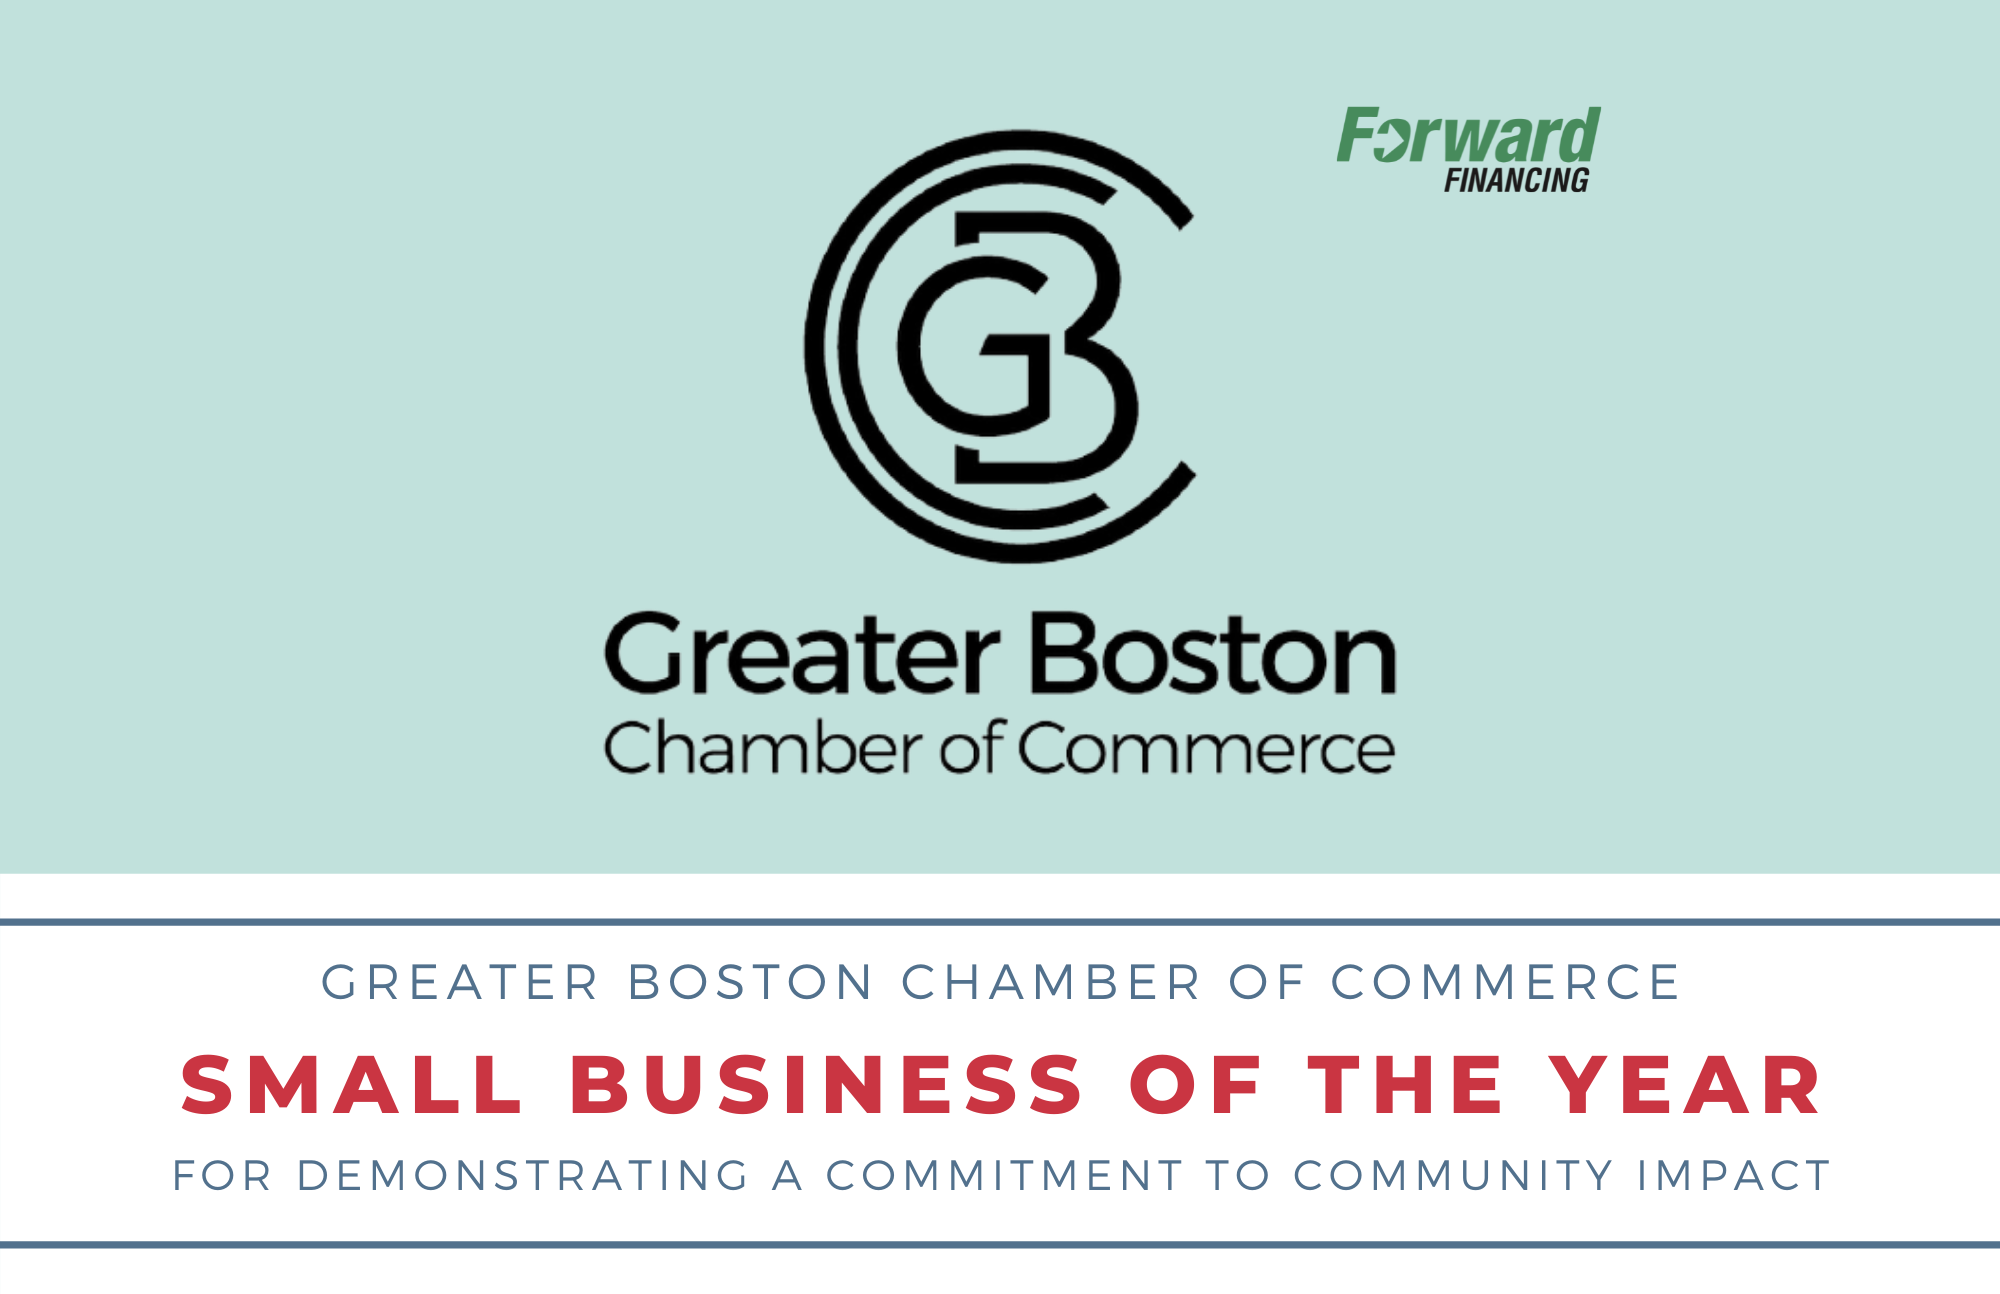 Forward Financing Small Business of Year for Community Impact